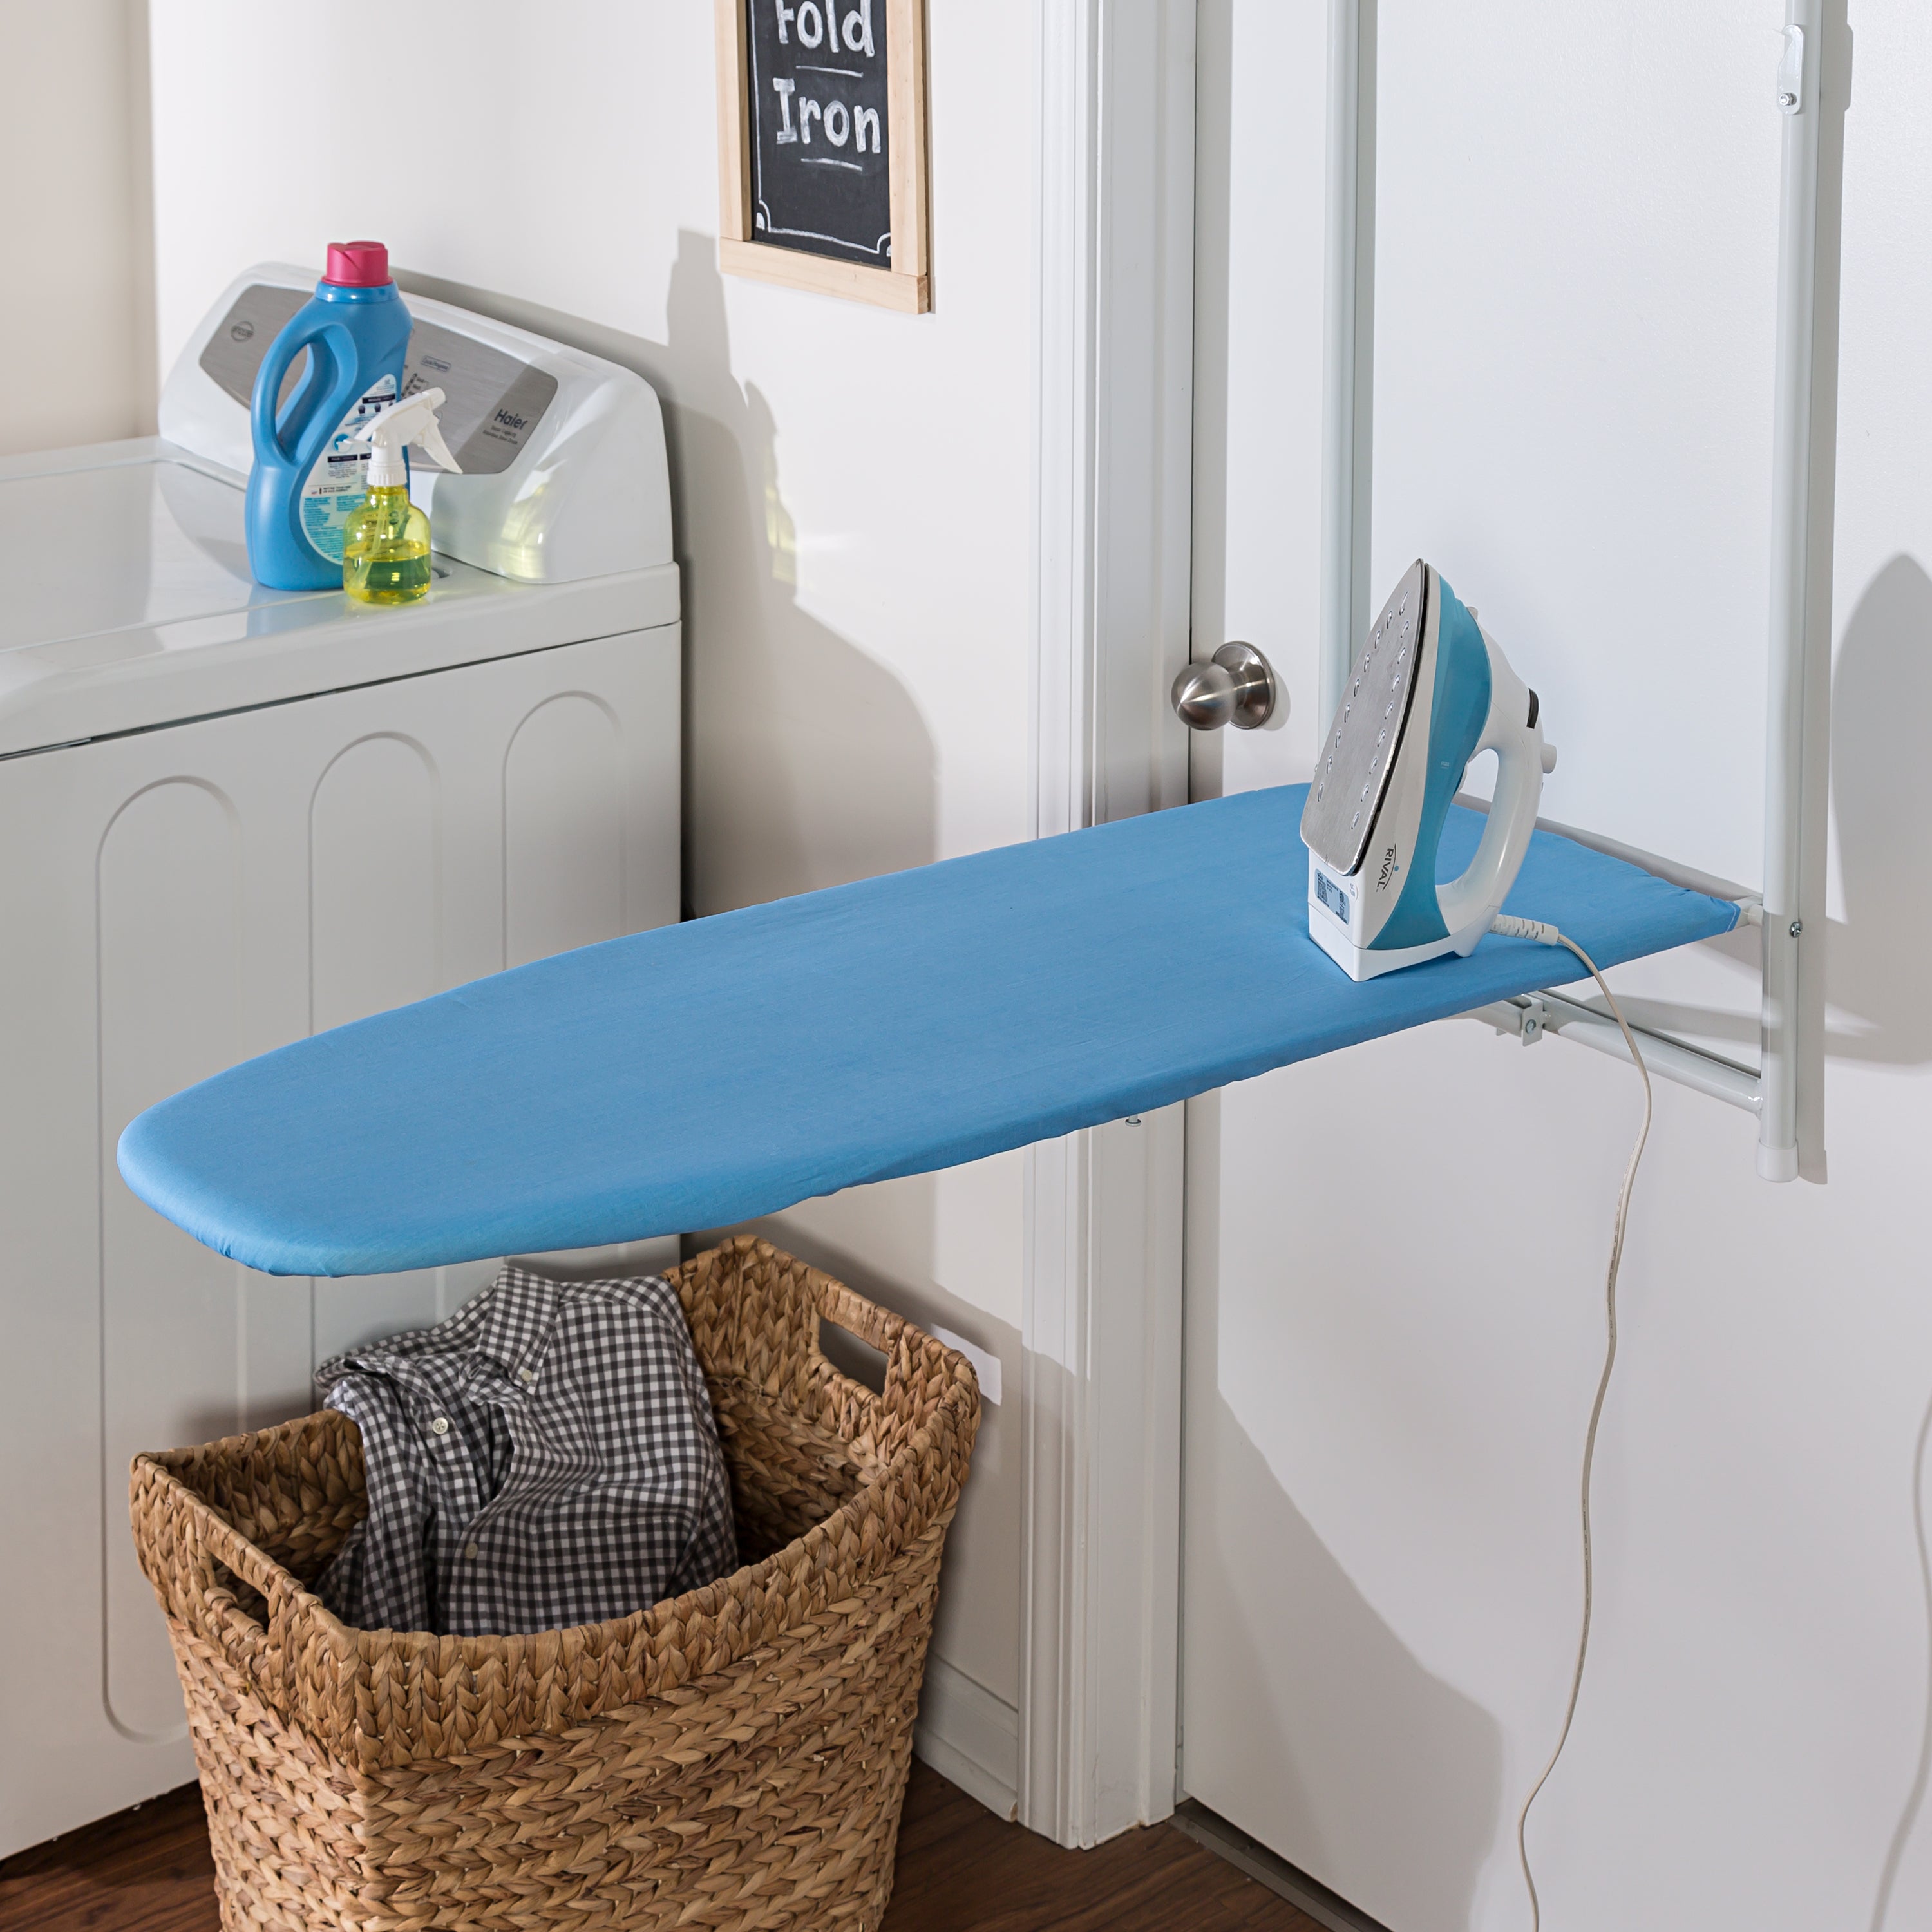 New Design Foldable Tabletop Ironing Board, Hanging Storage,With Cotto –  Honwide Houseware